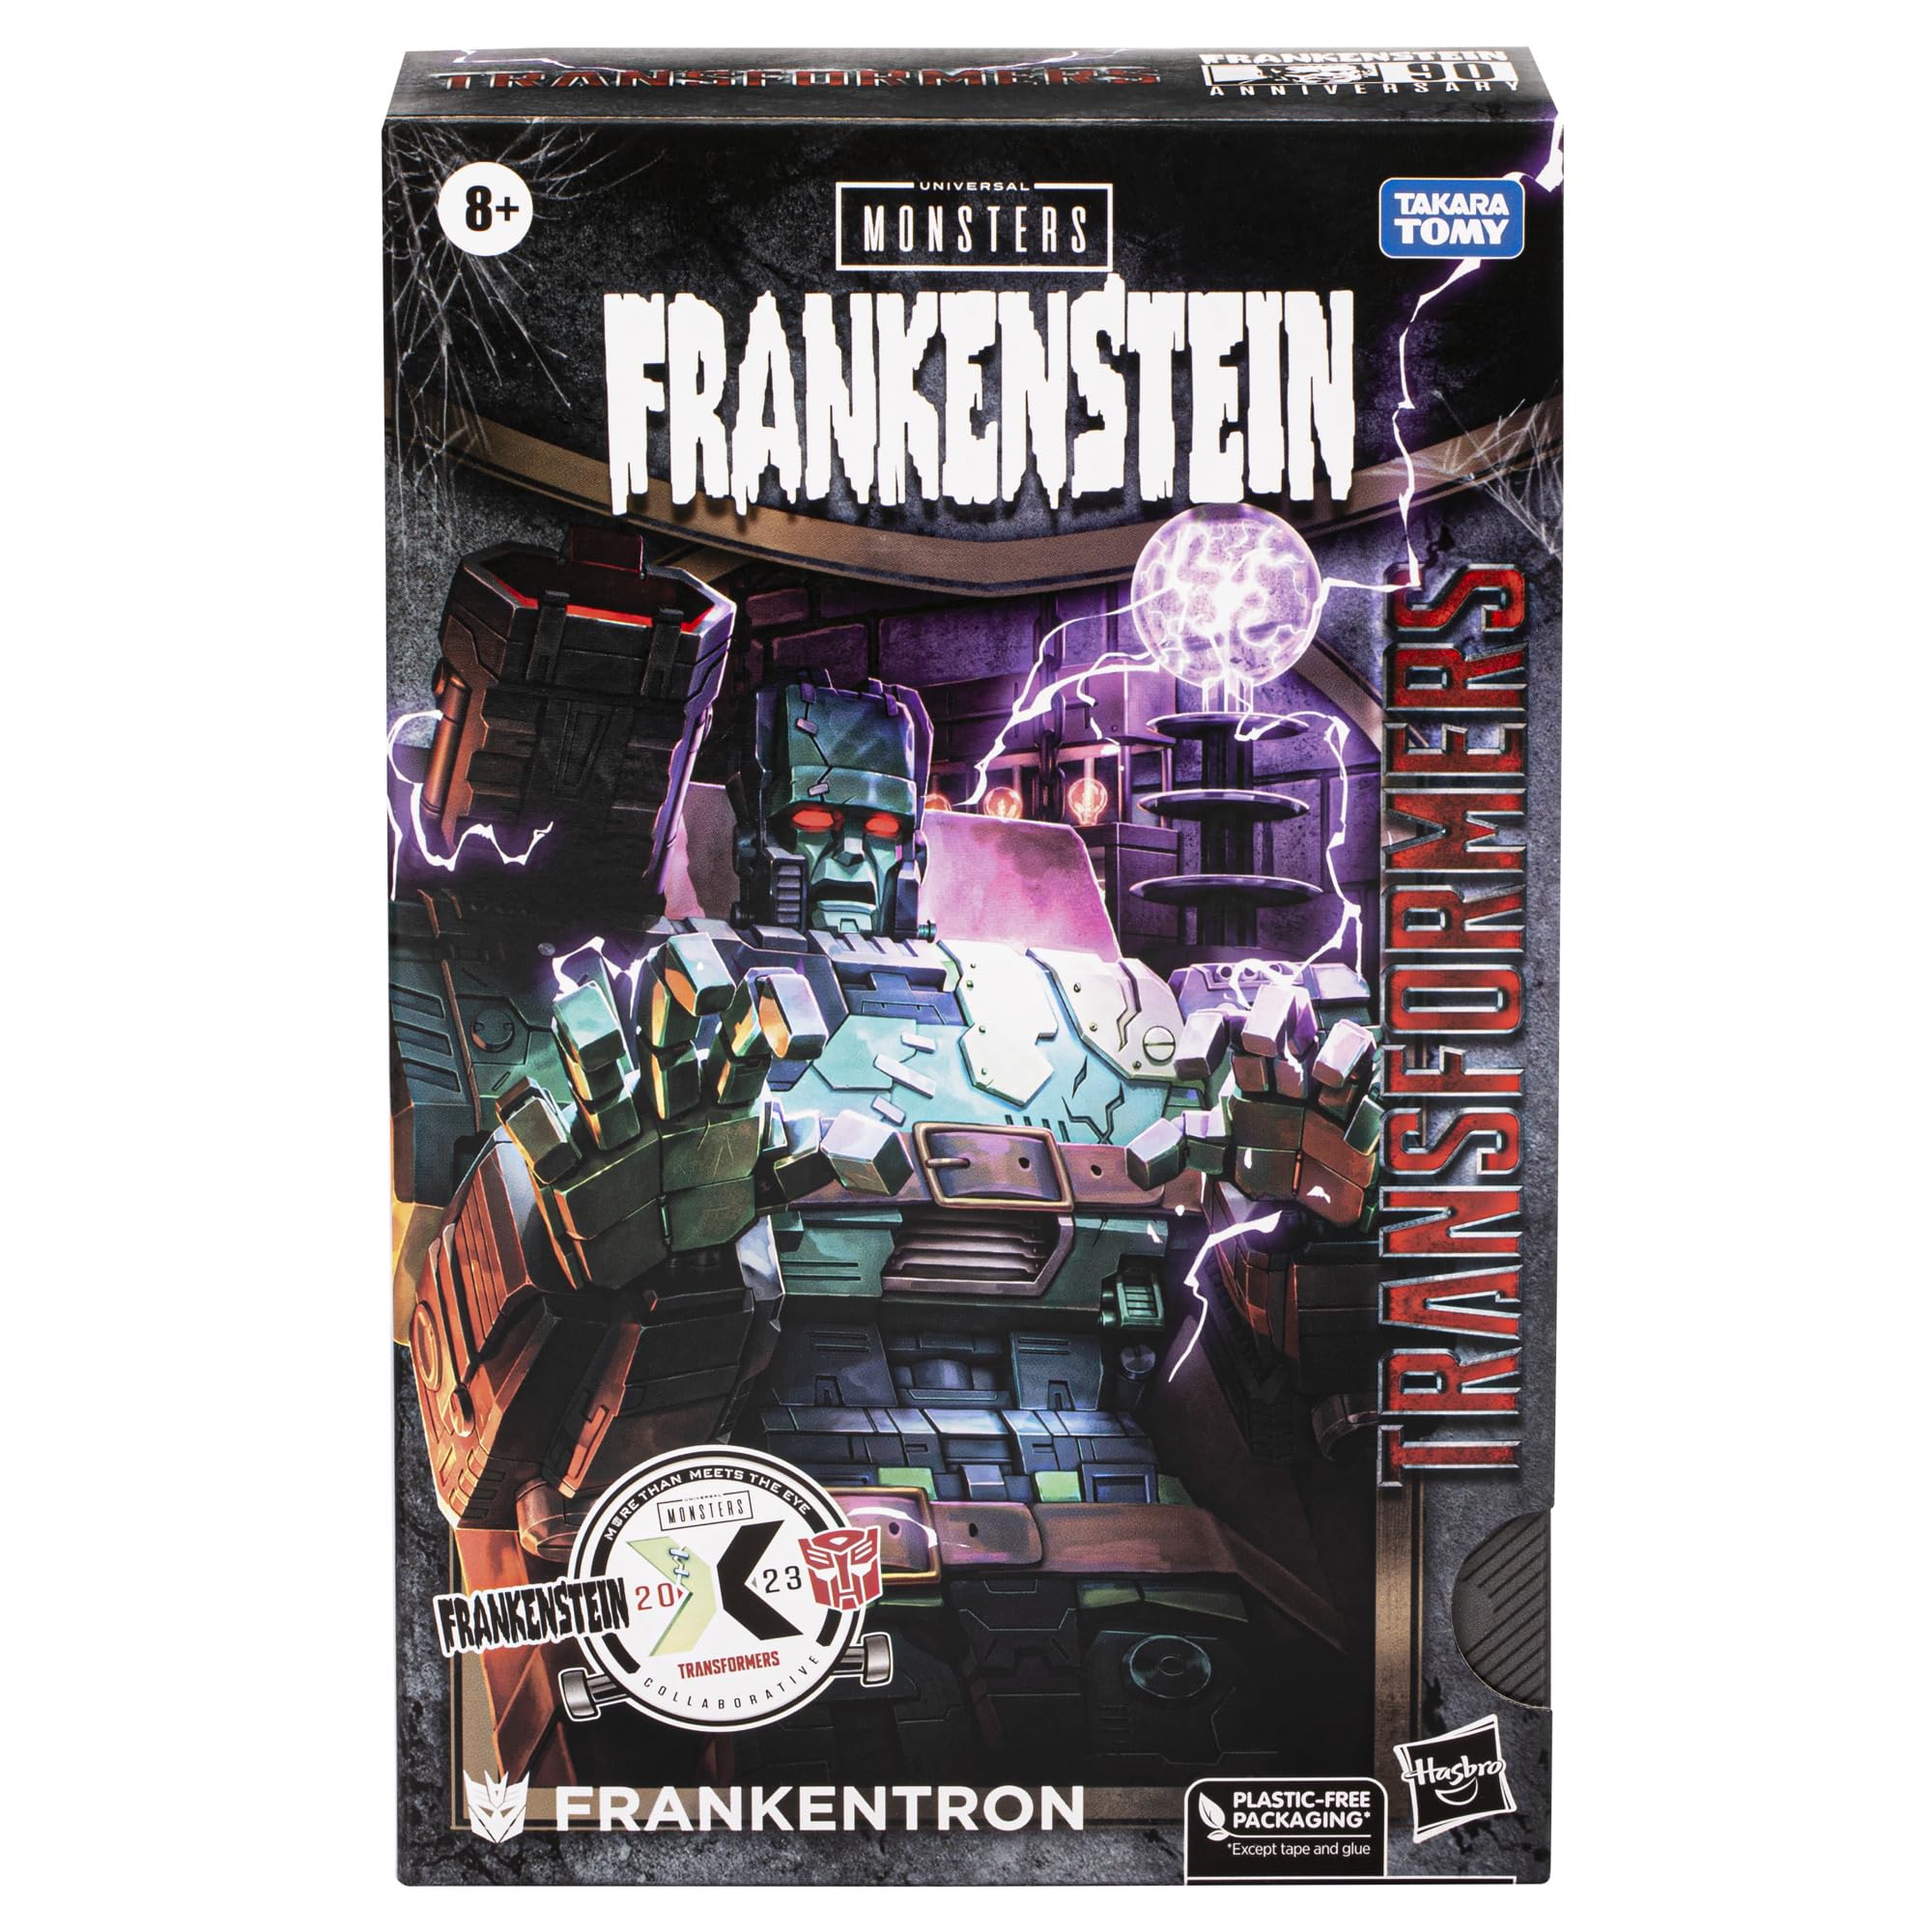 Transformers Collaborative Universal Monsters Frankenstein x Frankentron, Halloween Action Figure for Boys and Girls Ages 8+